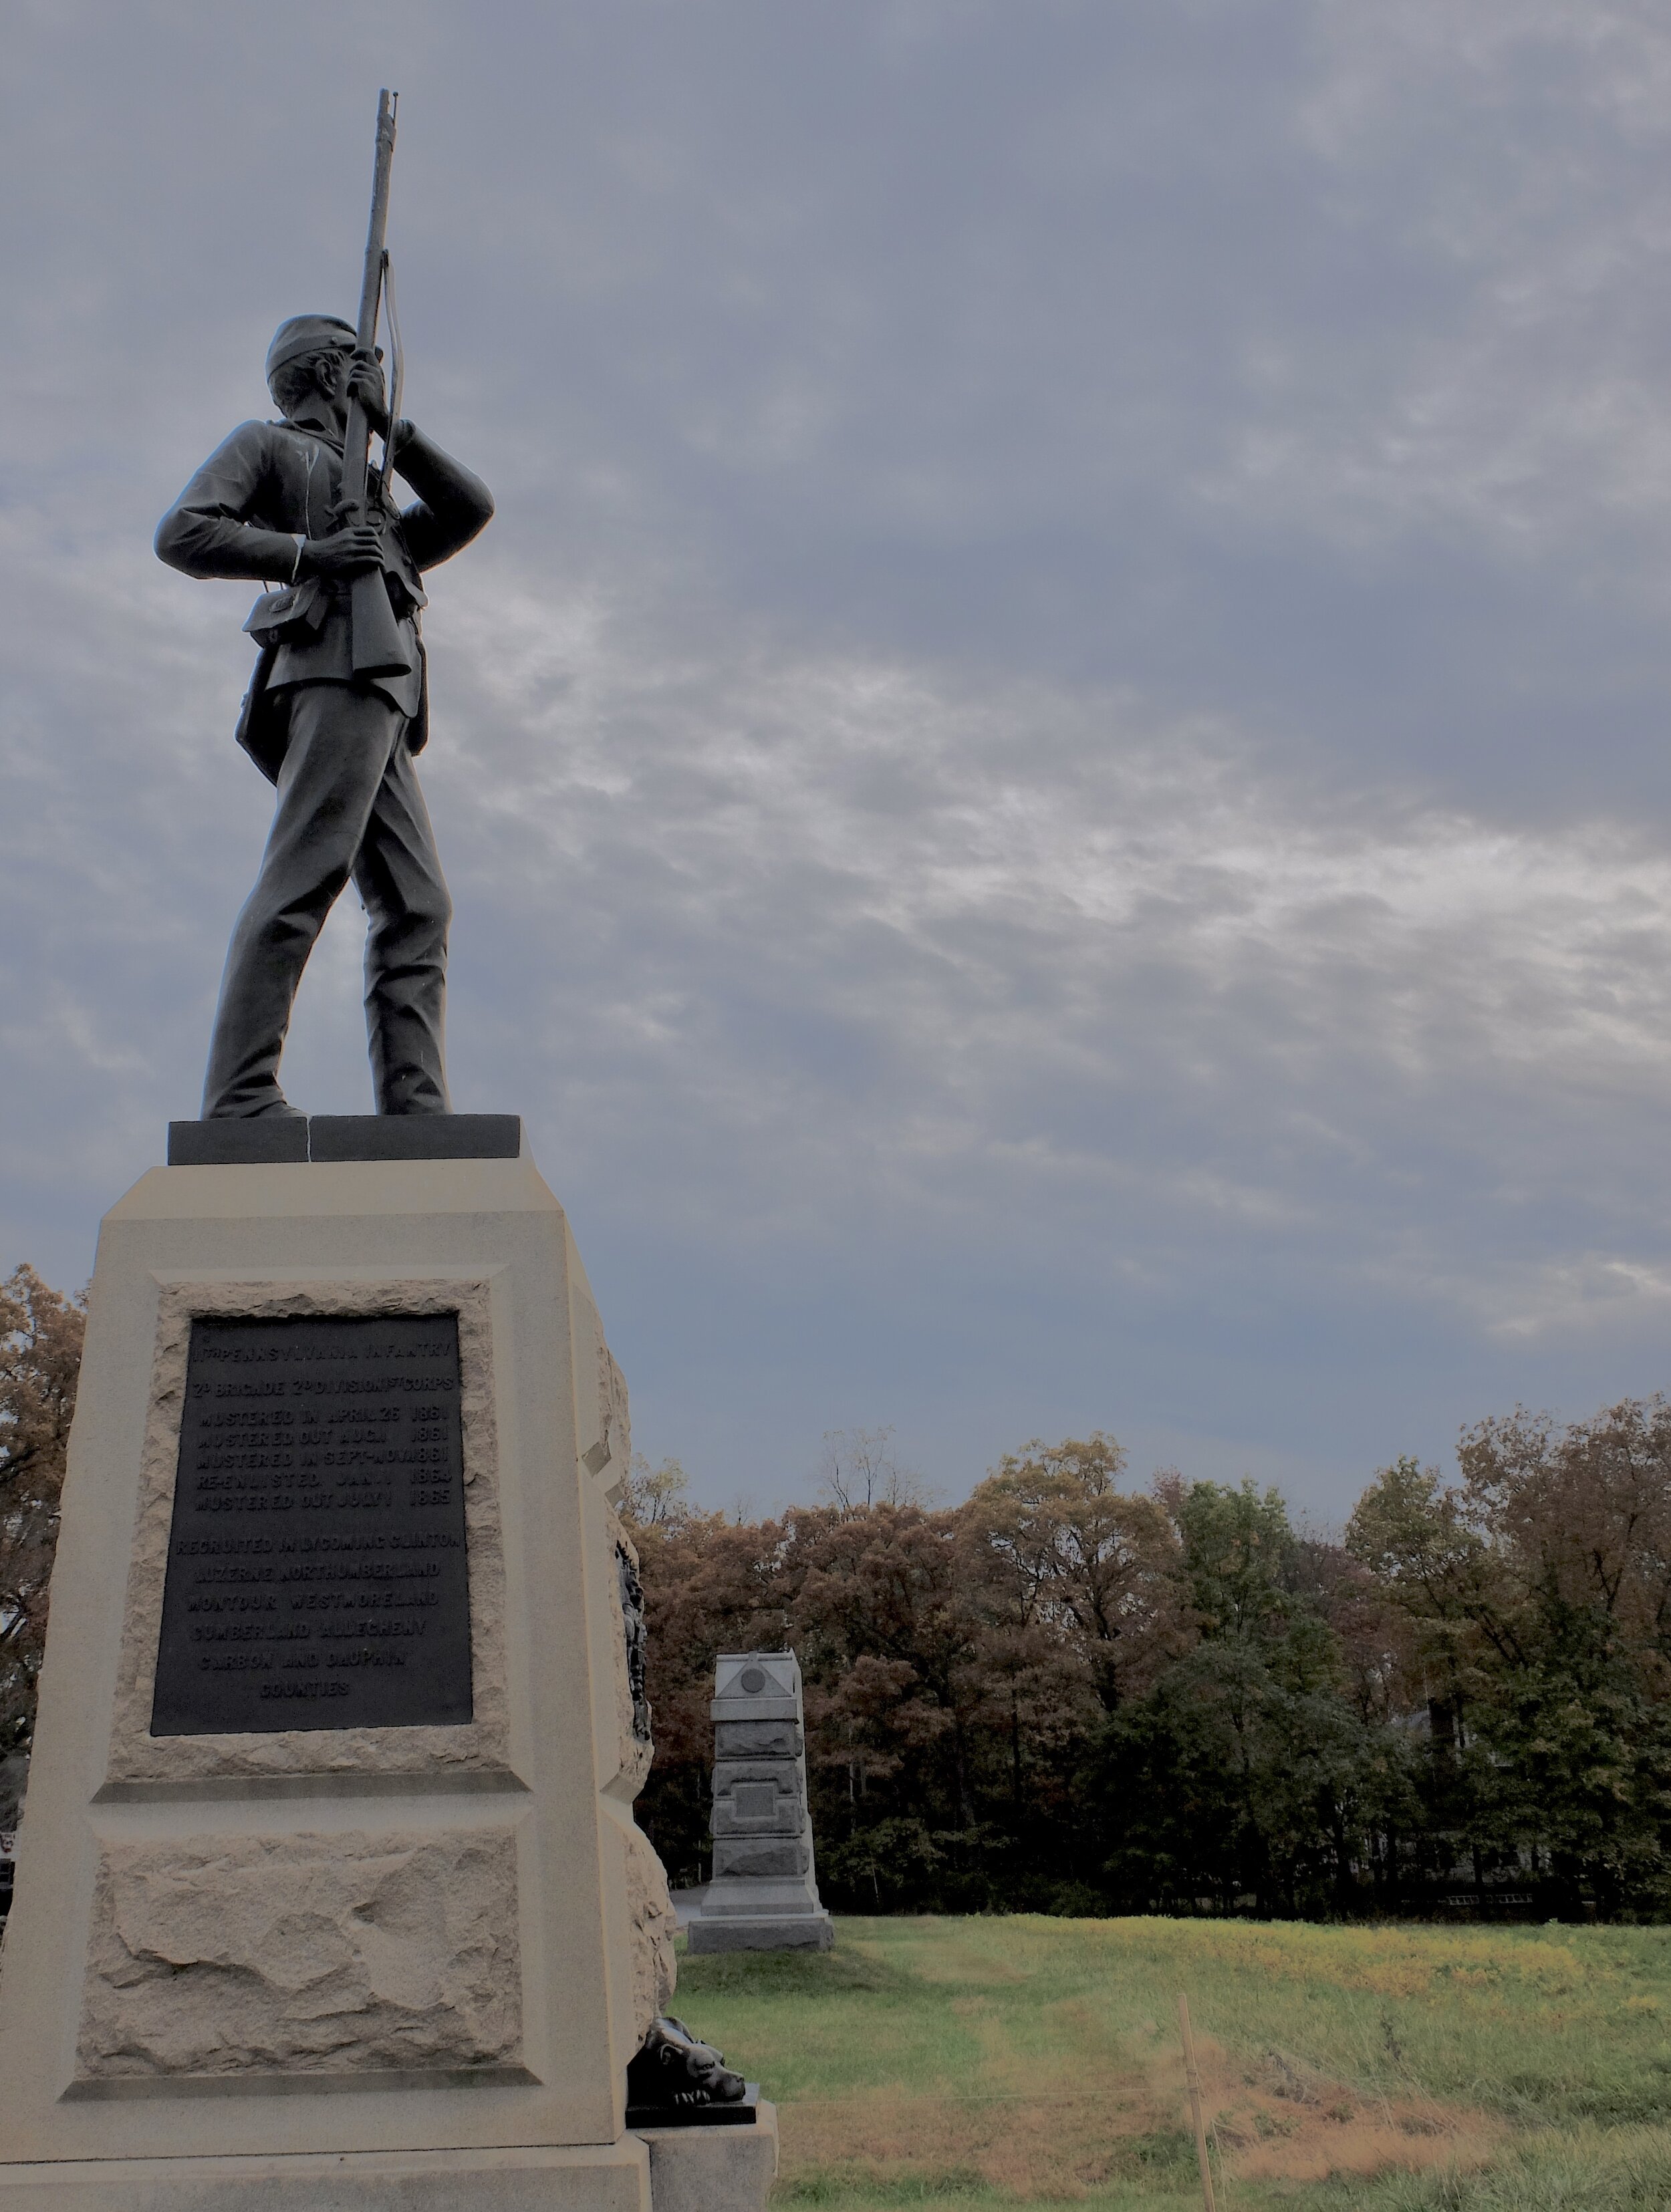 Canine mascot Sallie, statue below,  accompanied the 11th Penn. Infantry regiment into the fighting, taking a position at the front lines and barking furiously at the enemy.